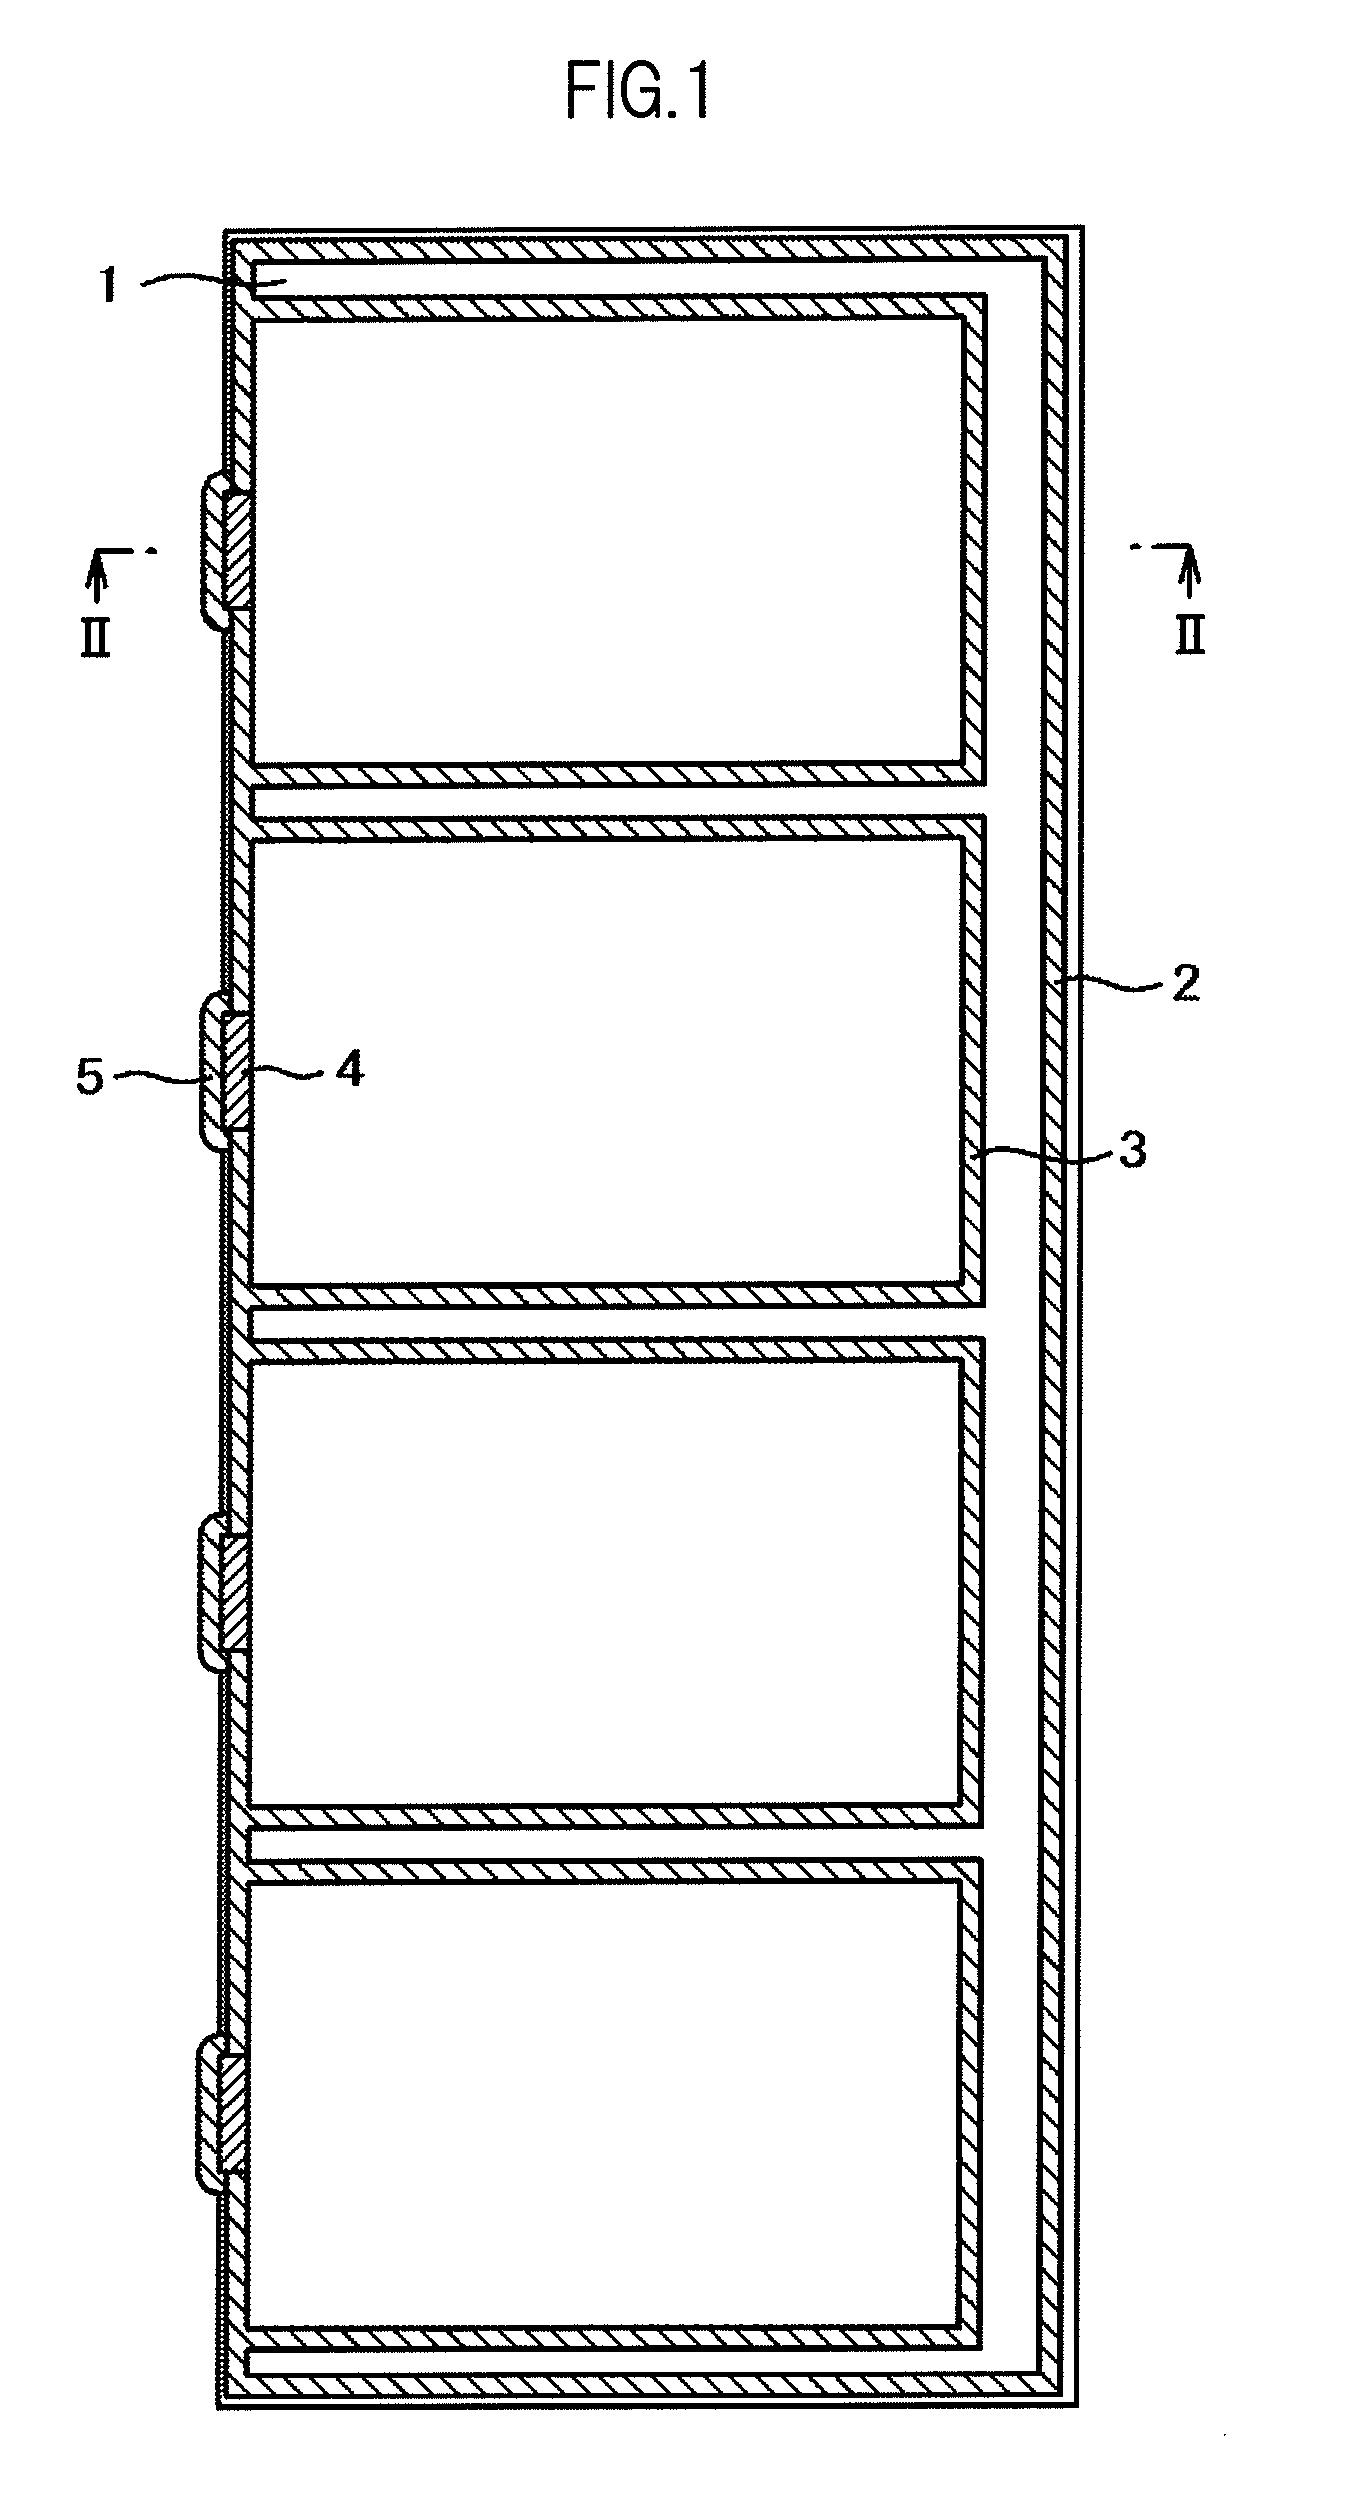 Method of manufacturing liquid crystal display device including forming beveled sides of substrates forming liquid crystal panel